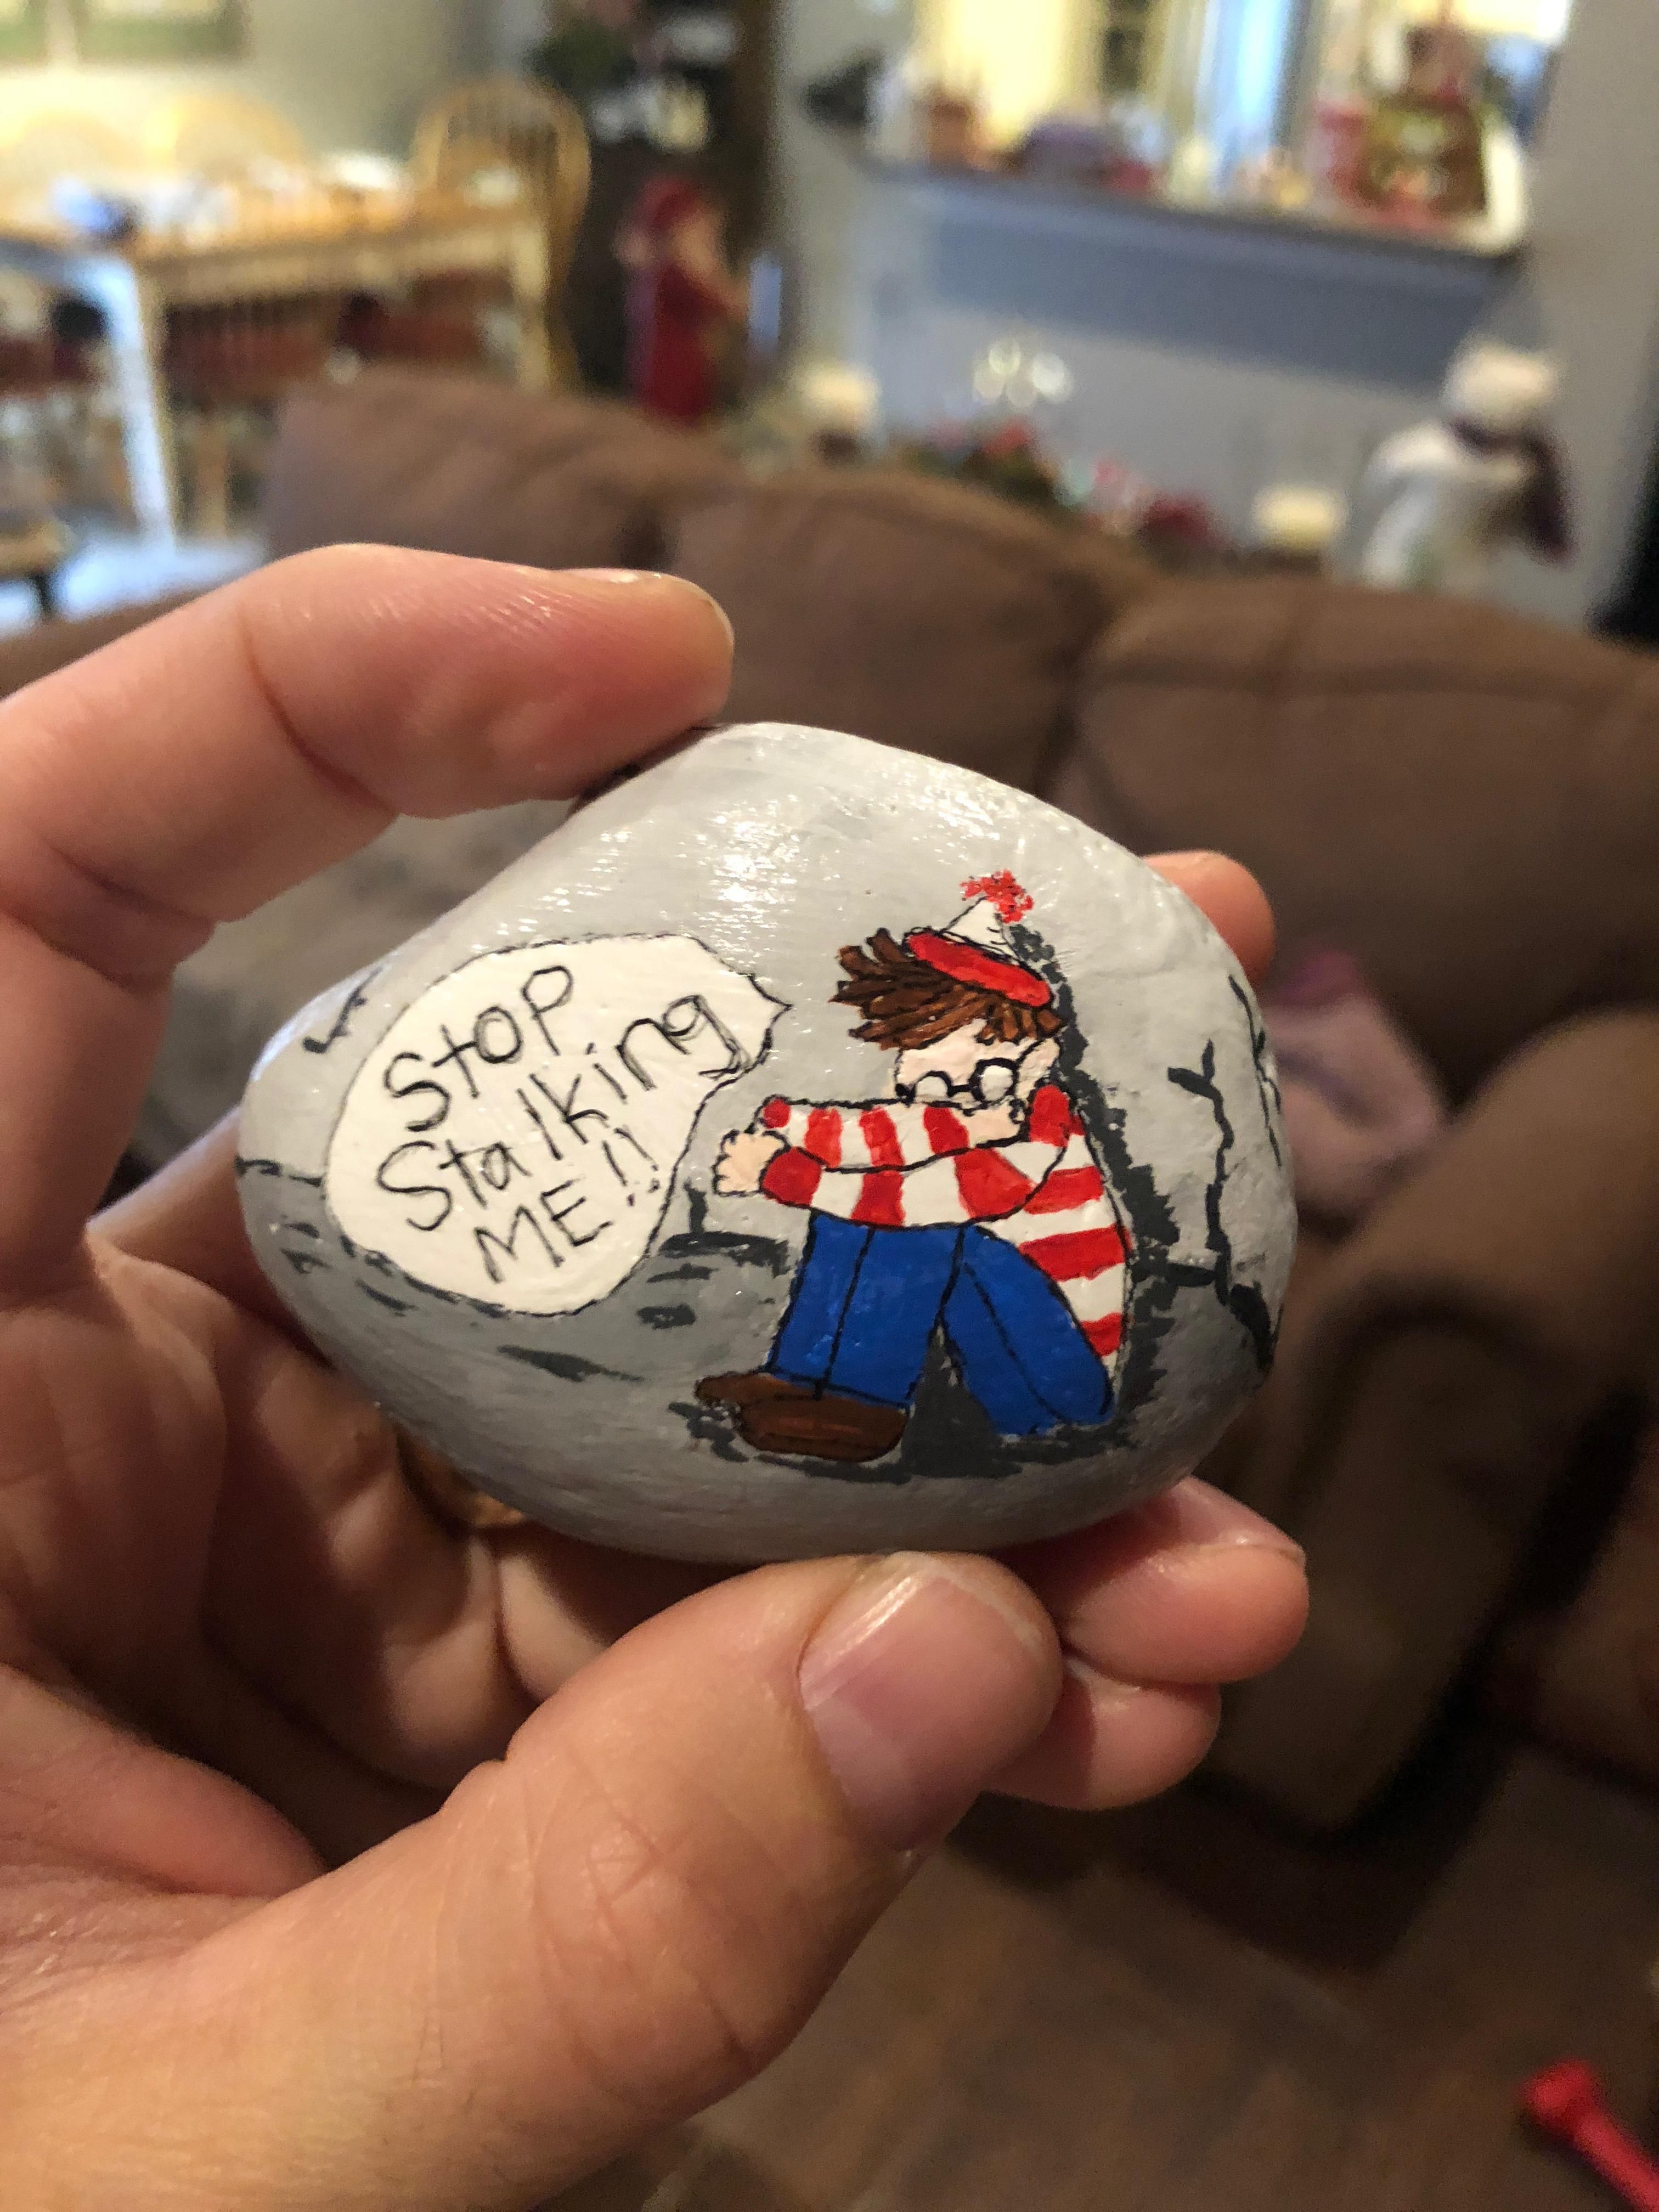 My aunt painted this rock for my brother's Christmas gift.